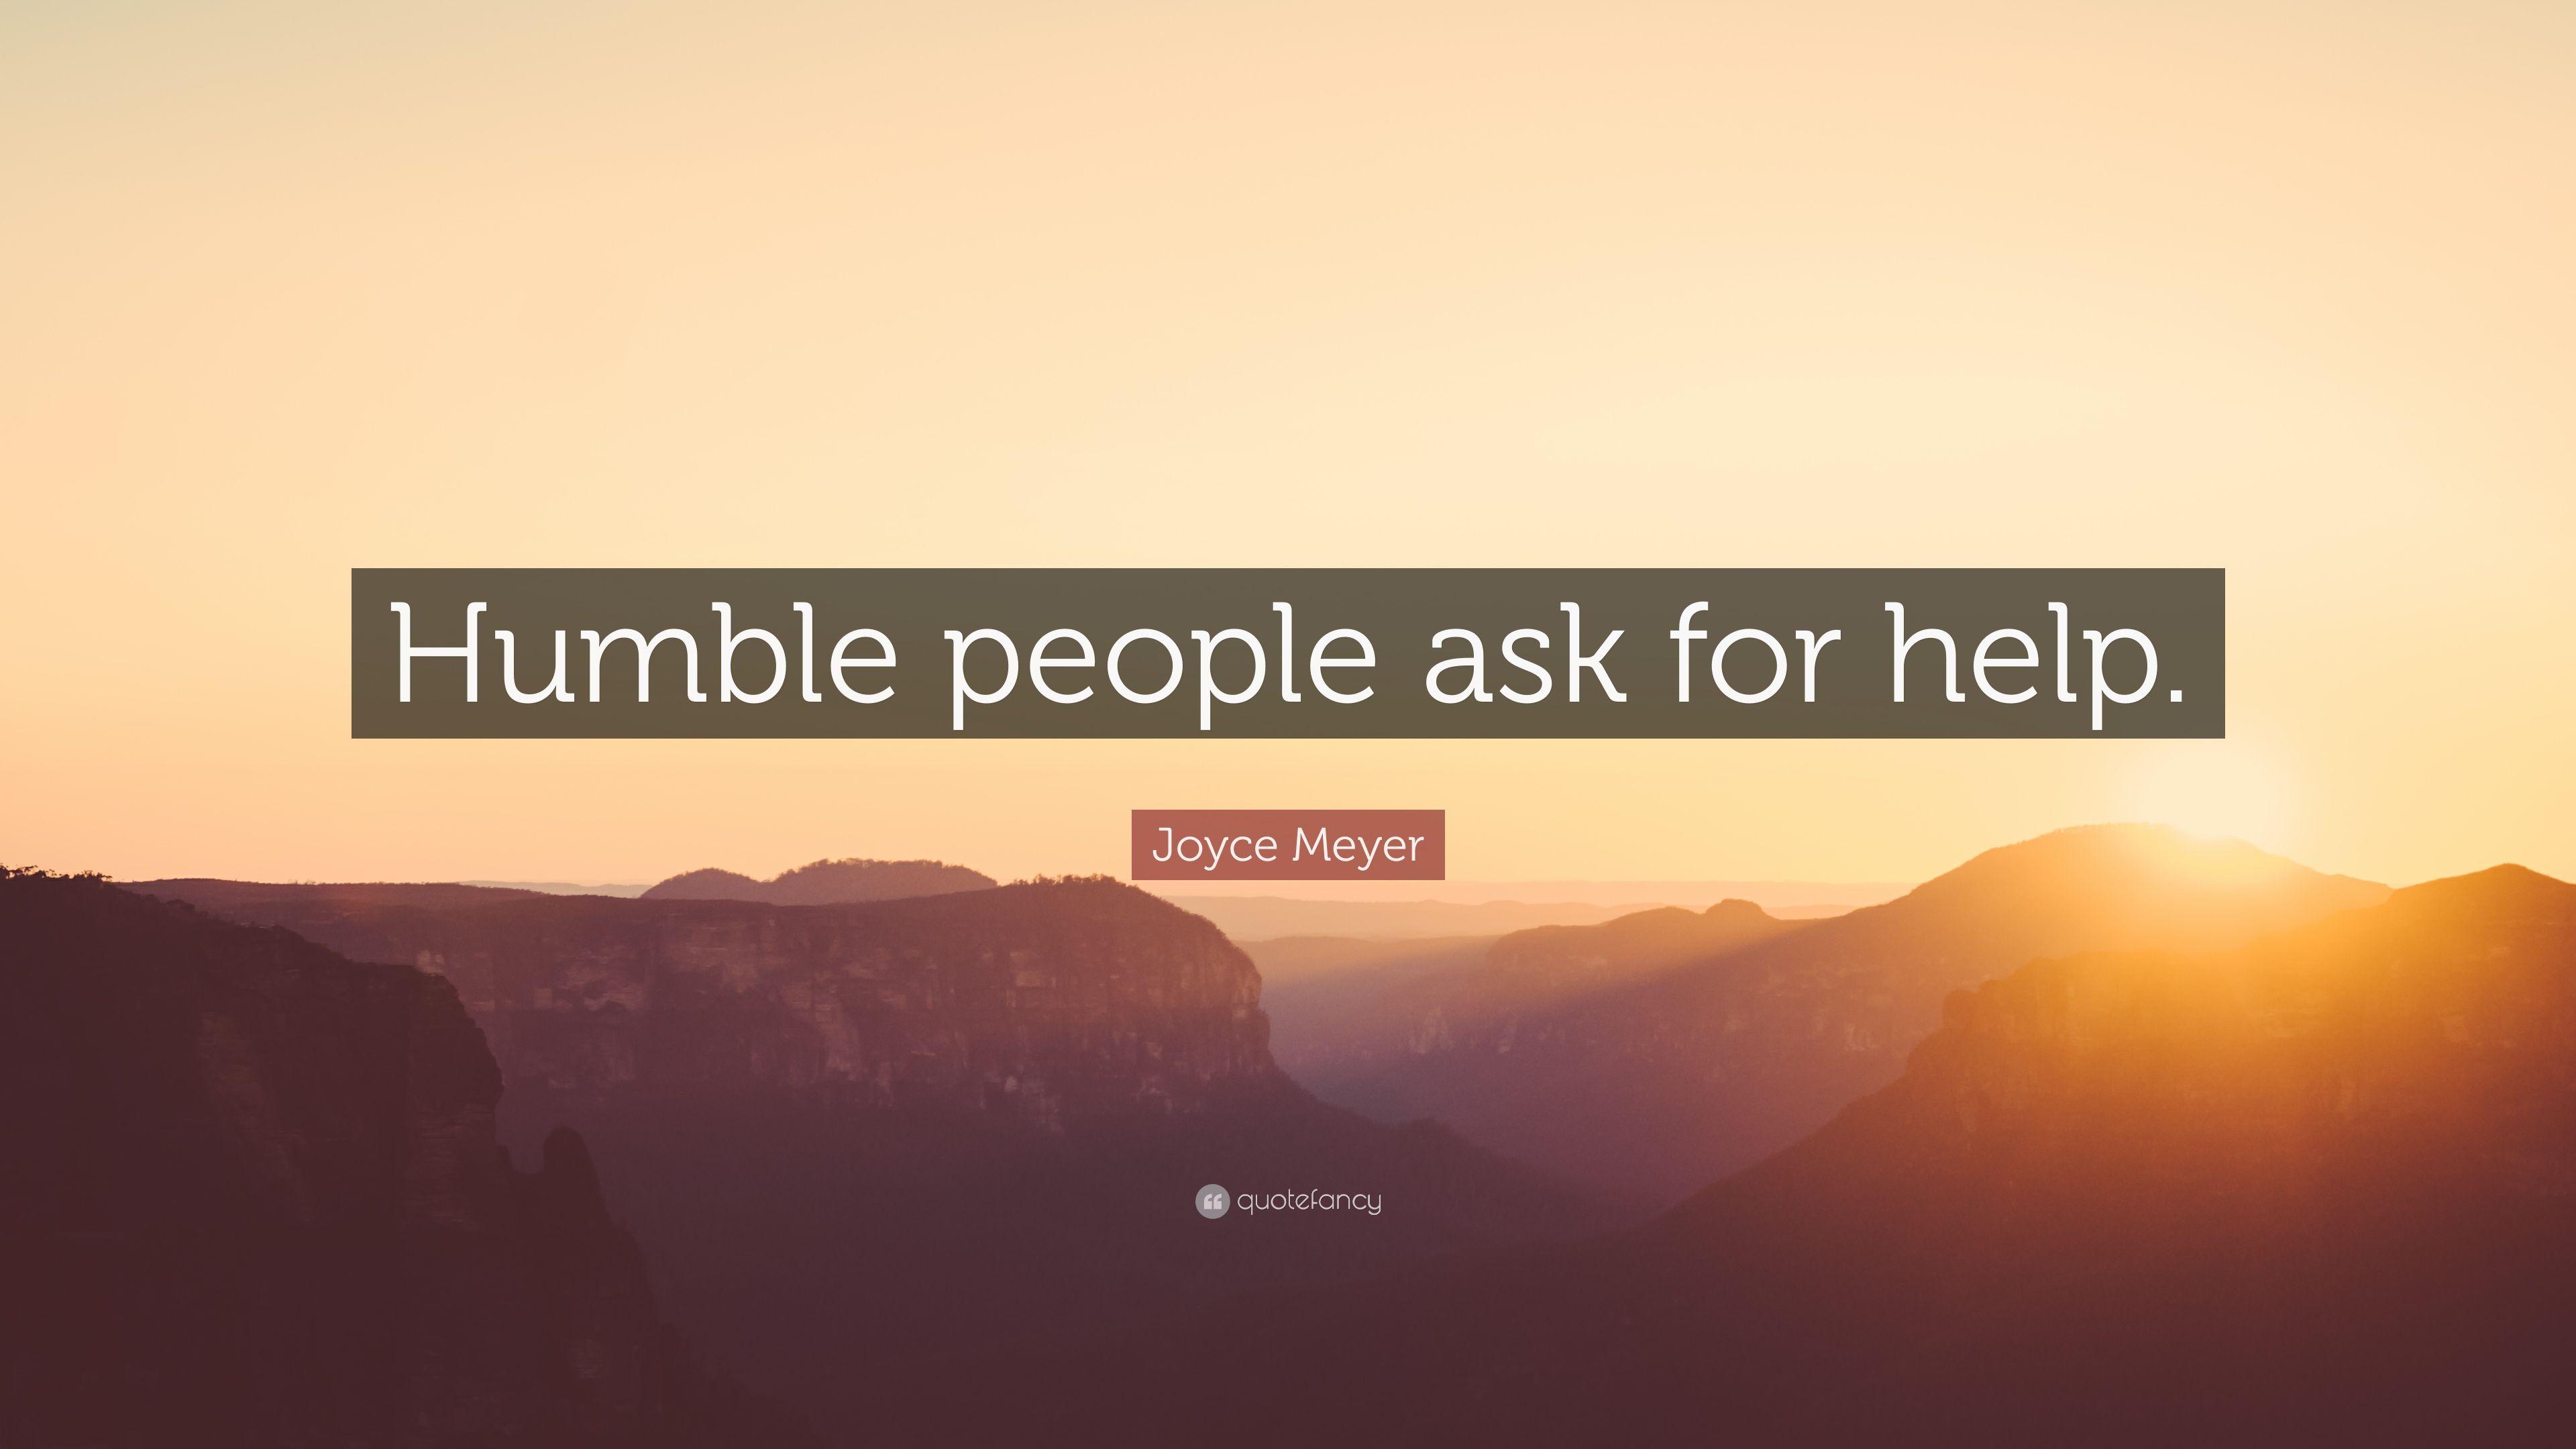 Joyce Meyer Quote: “Humble people ask for help.” 10 wallpaper